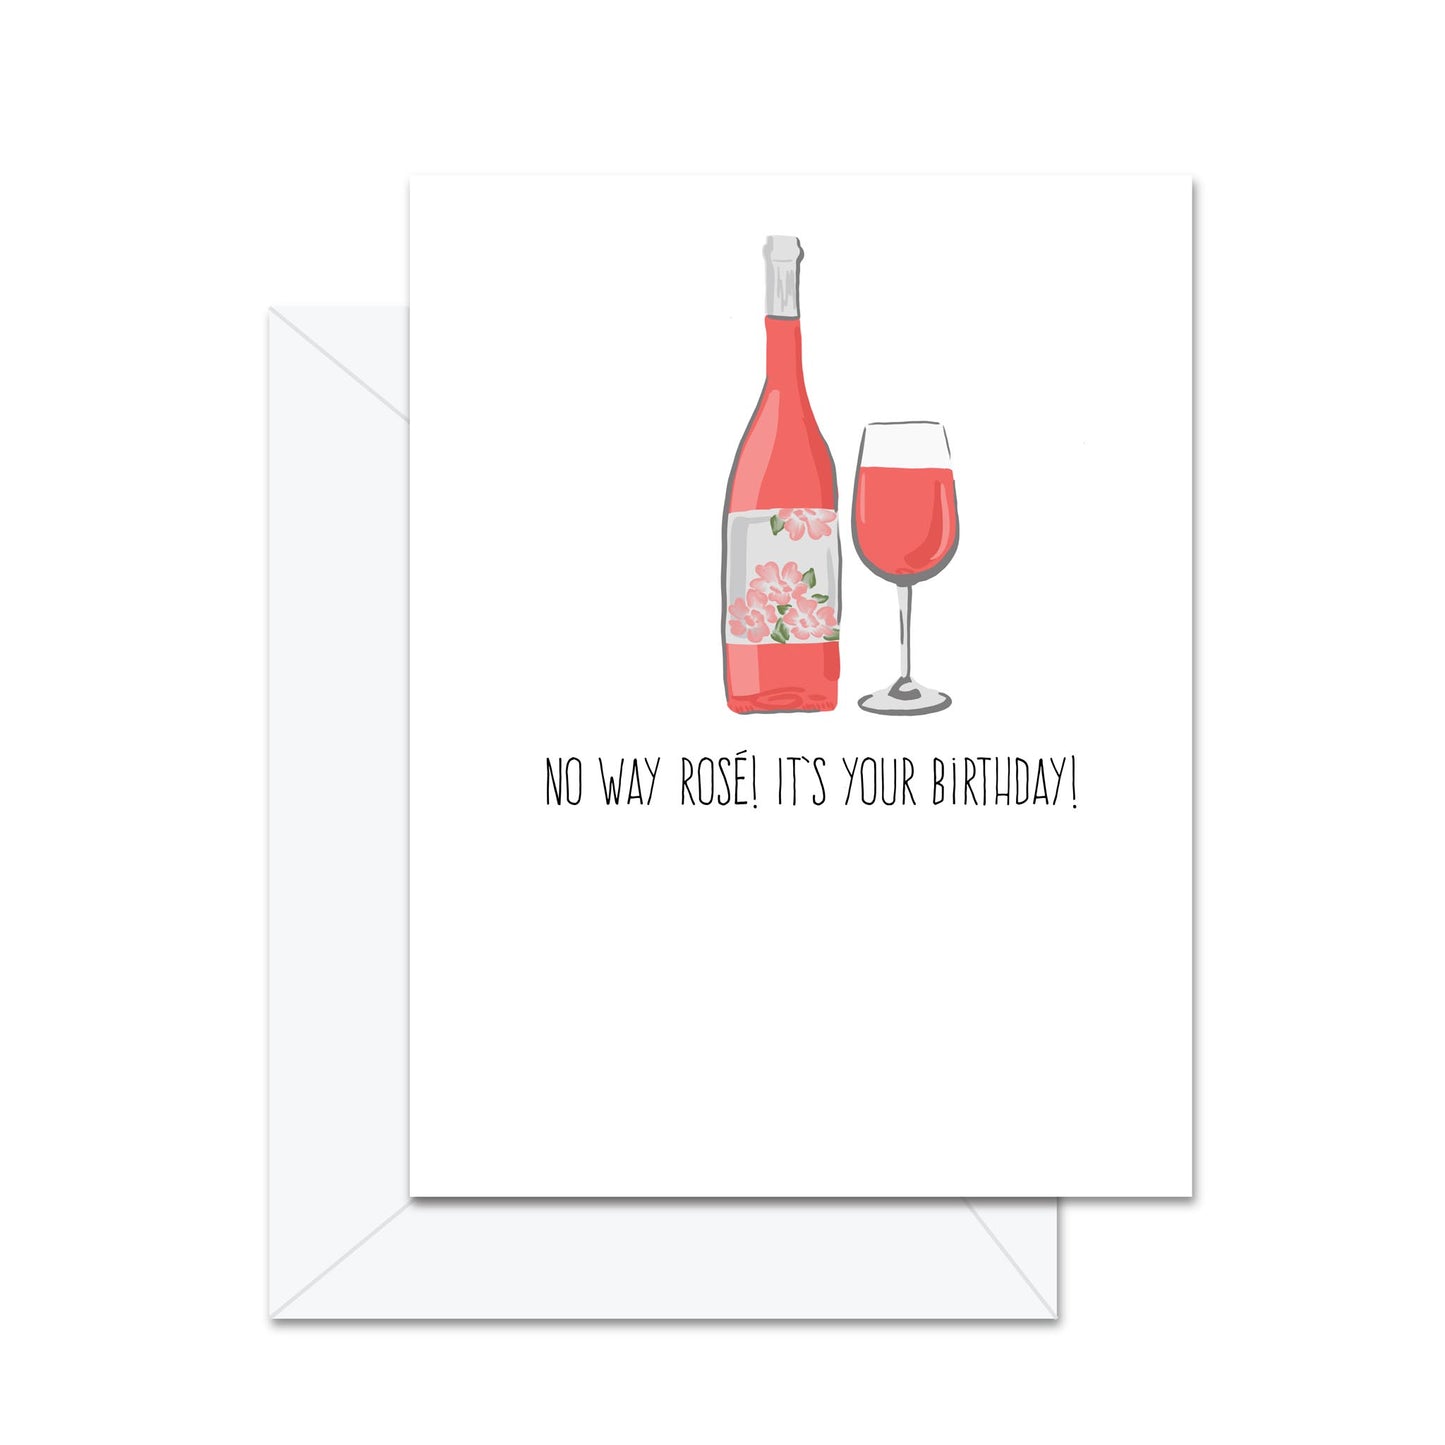 No Way Rose, It's Your Birthday! - Greeting Card